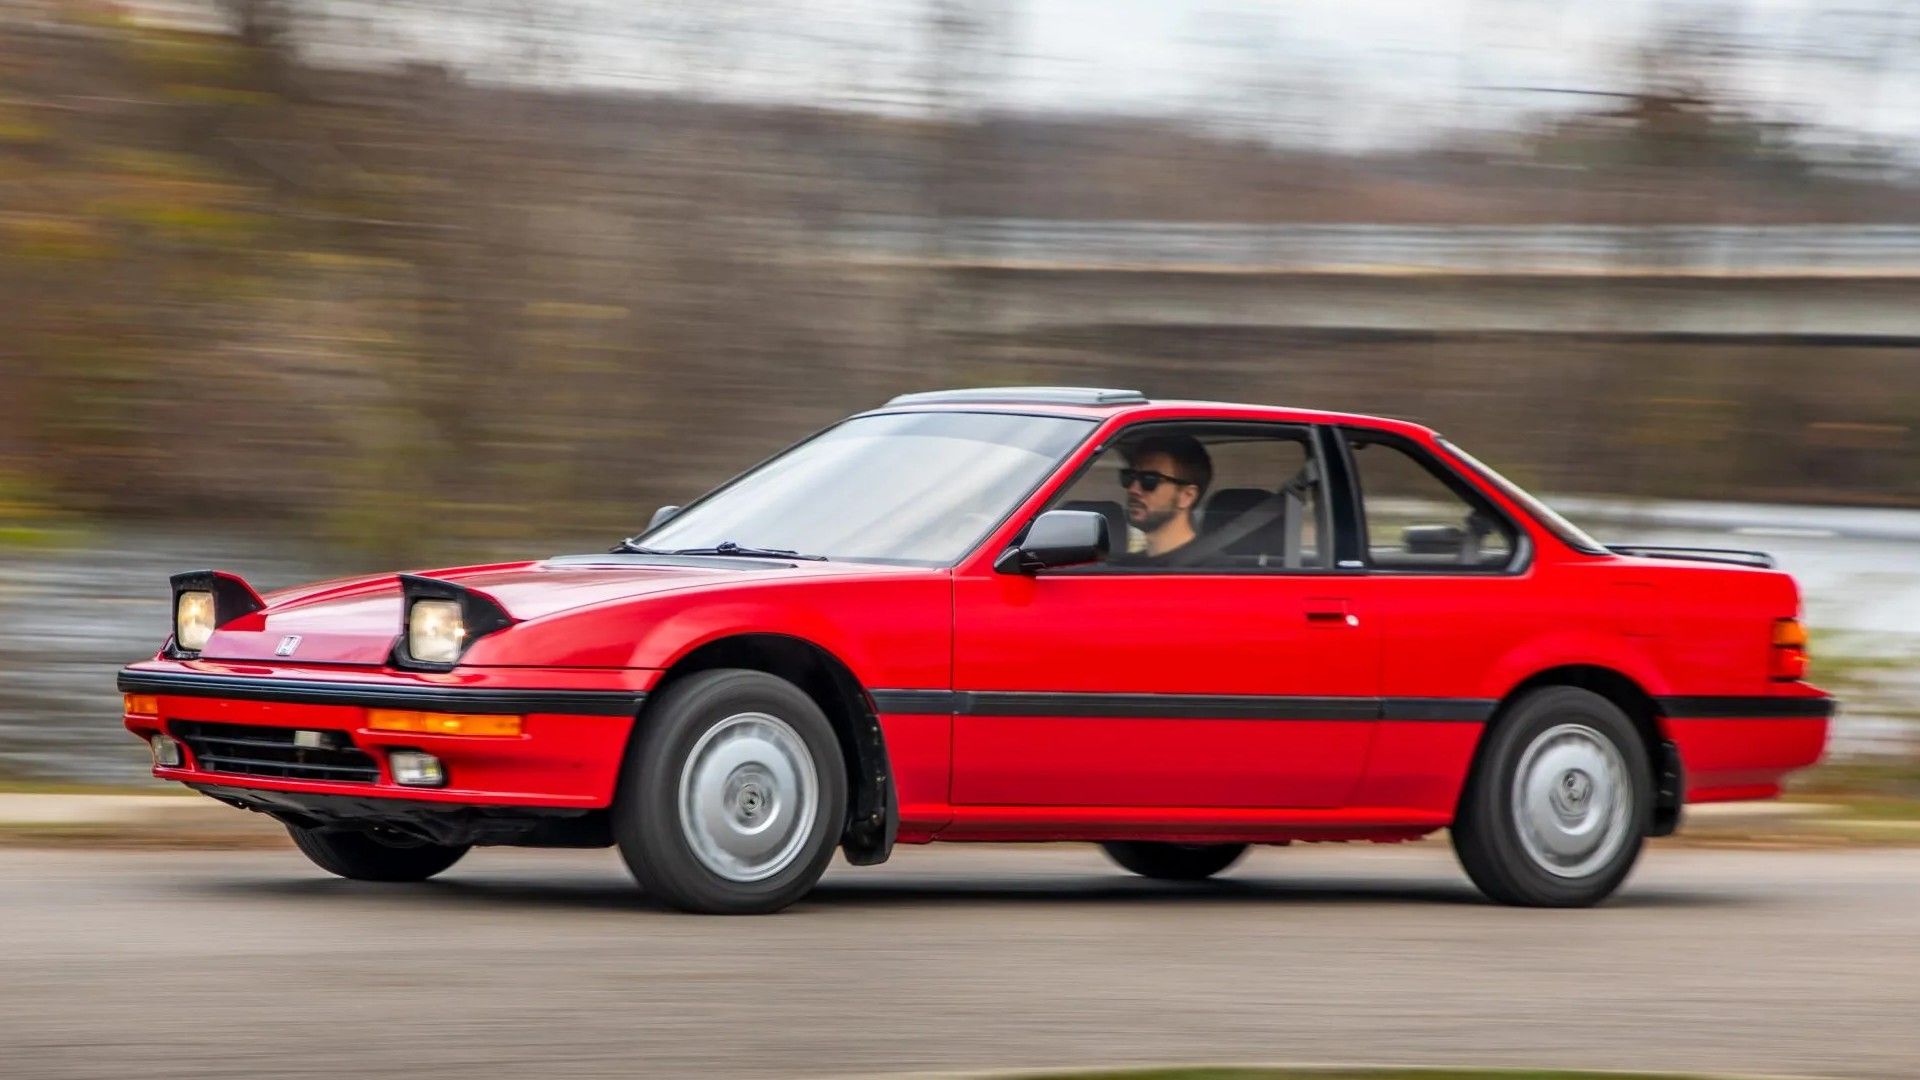 Before The Honda Prelude Returns, Here's A Classic Review Of The